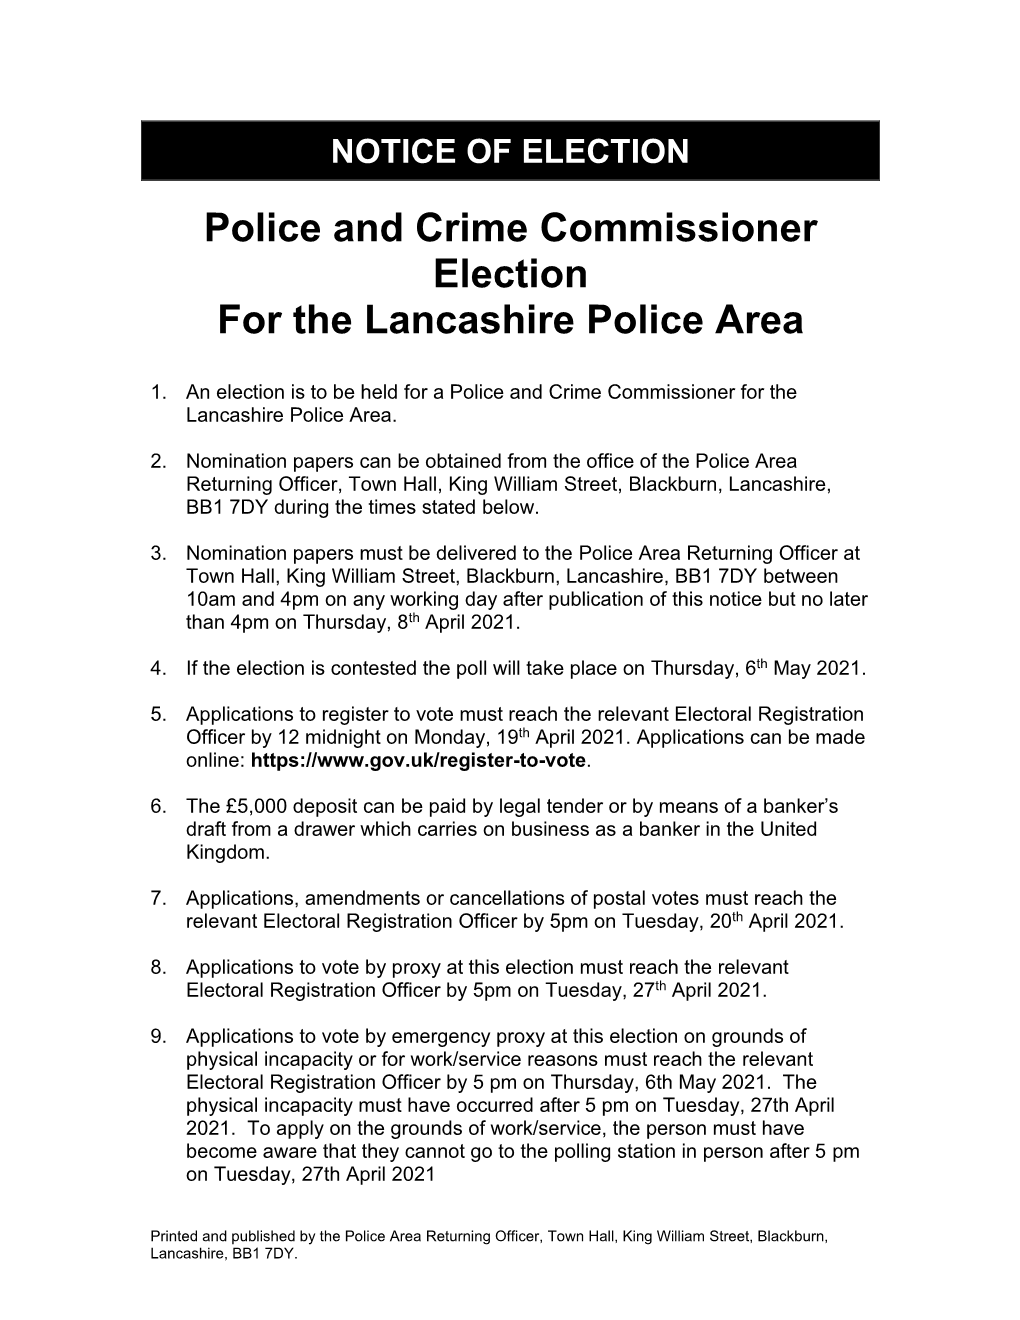 Police and Crime Commissioner Notice